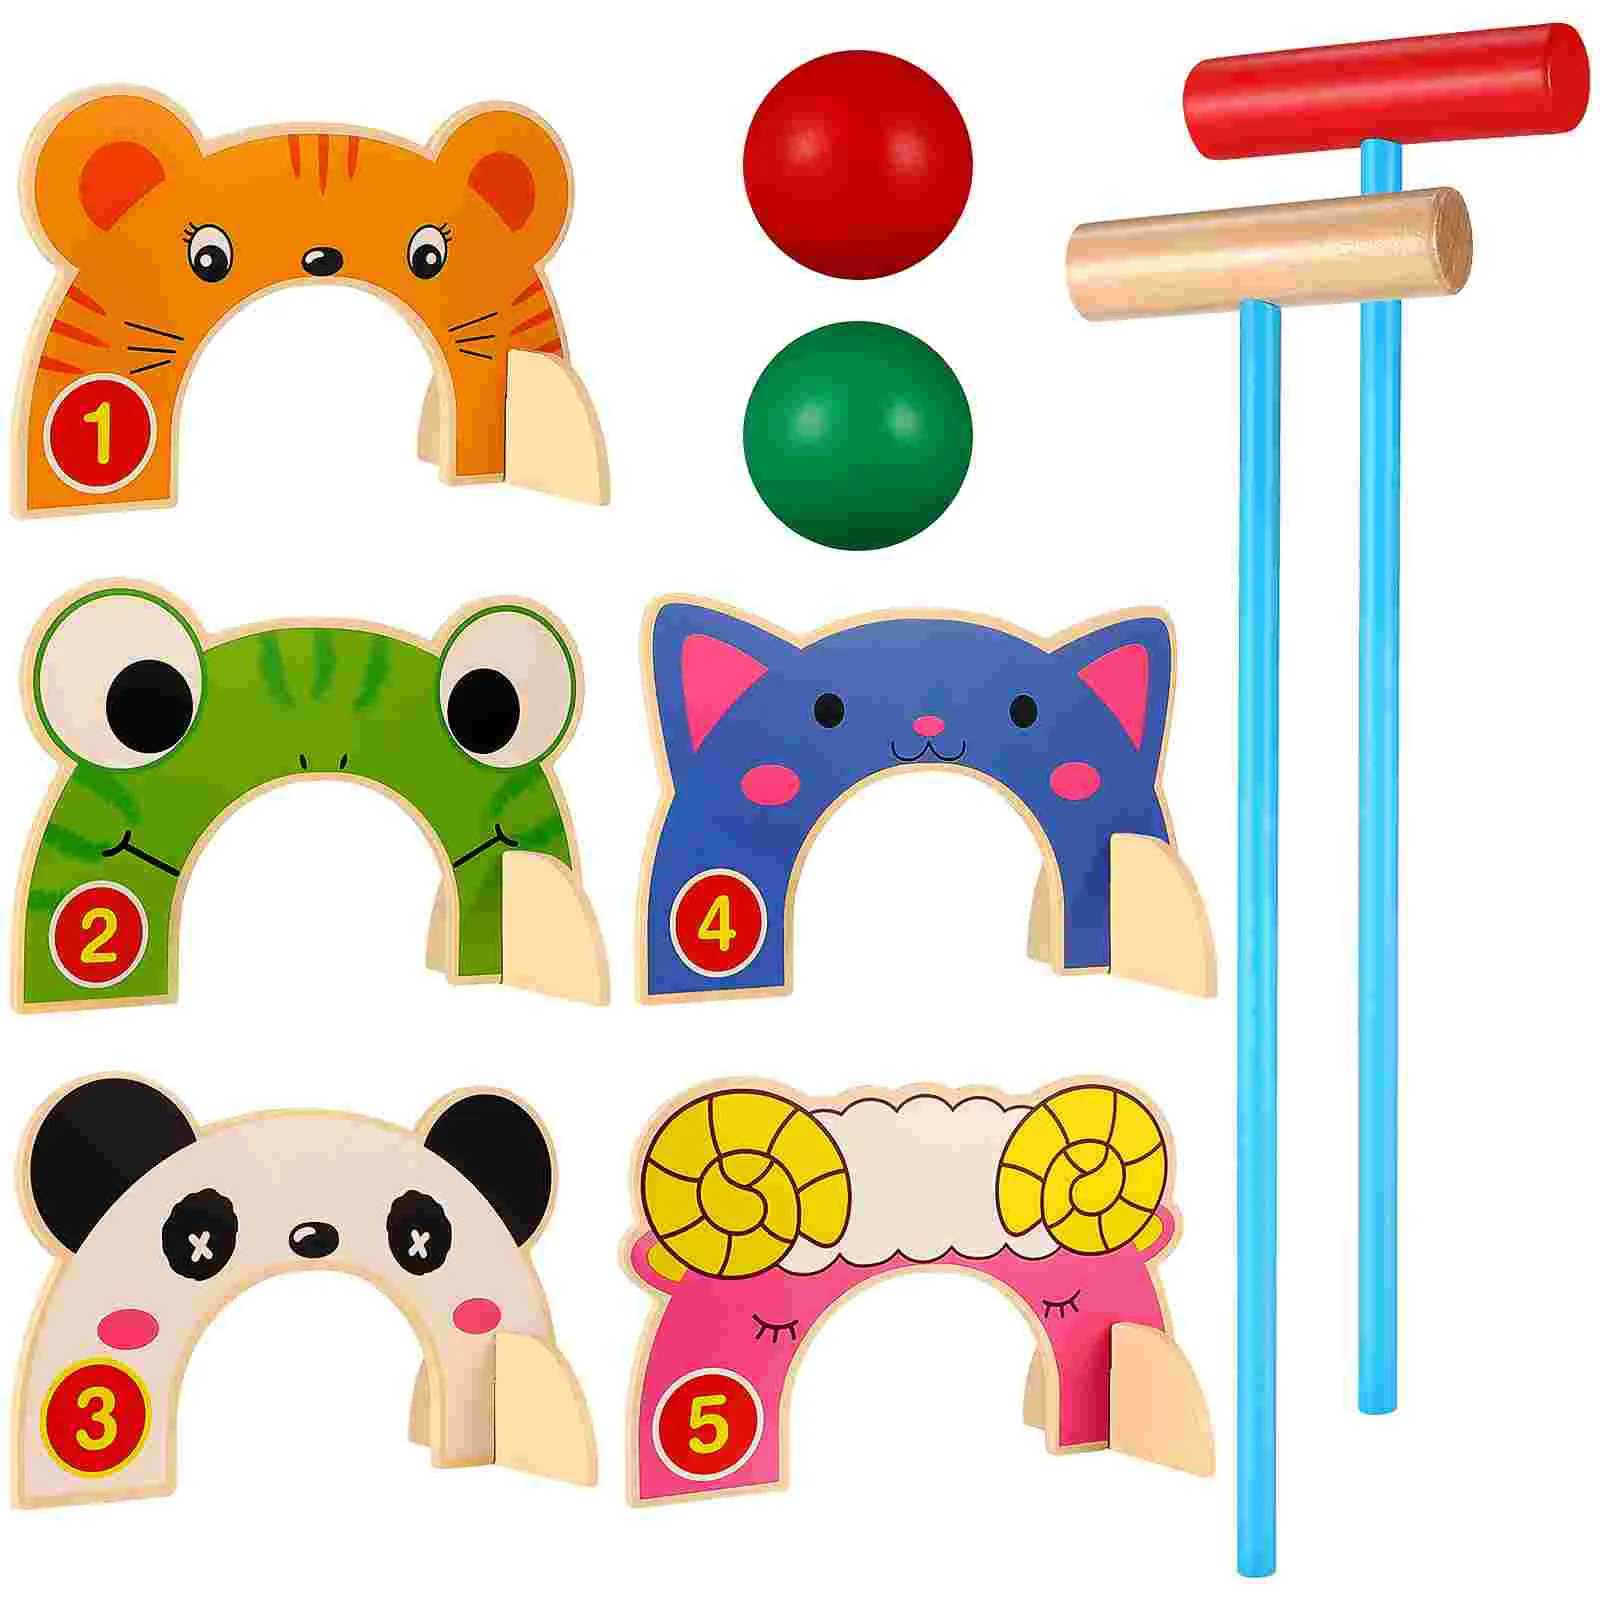 

Croquet Set Kids Games Sets Toy Toys Wood Wooden Lawn Families Adults Gateball Yard Cartoon Animal Outdoor Interactive Kid